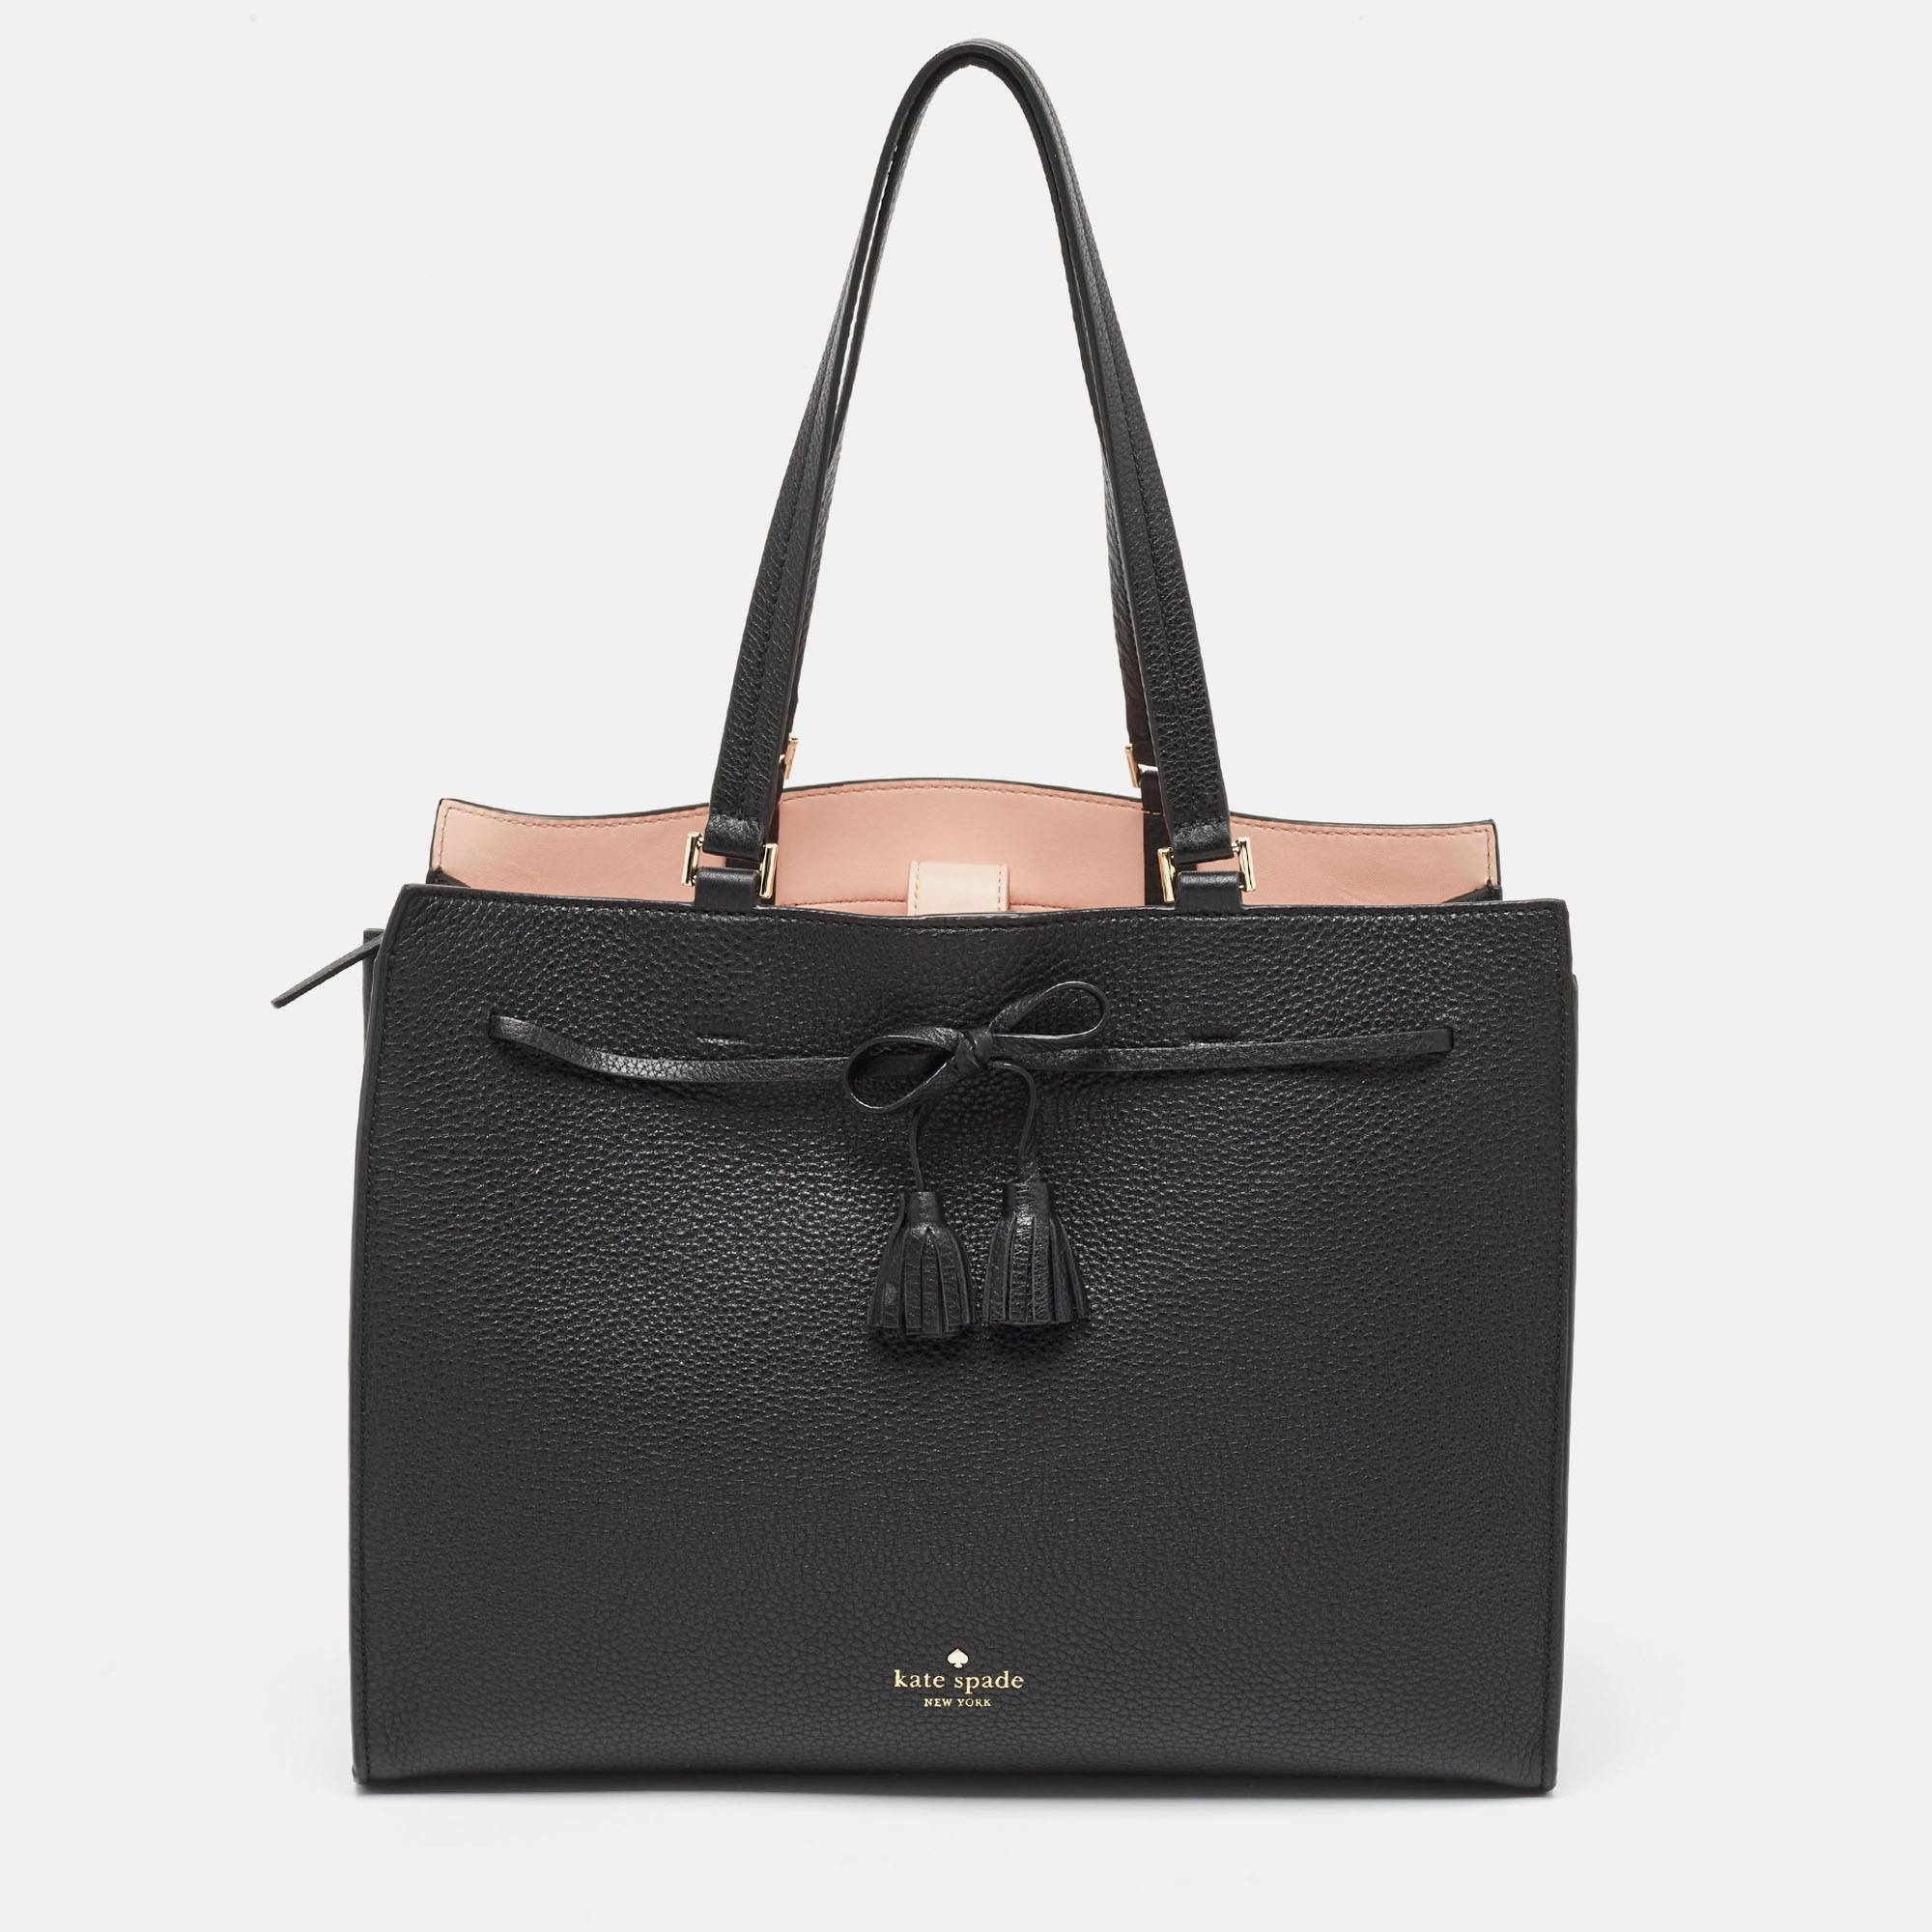 Pre-owned Kate Spade Black Leather New York Hayes Street Tote